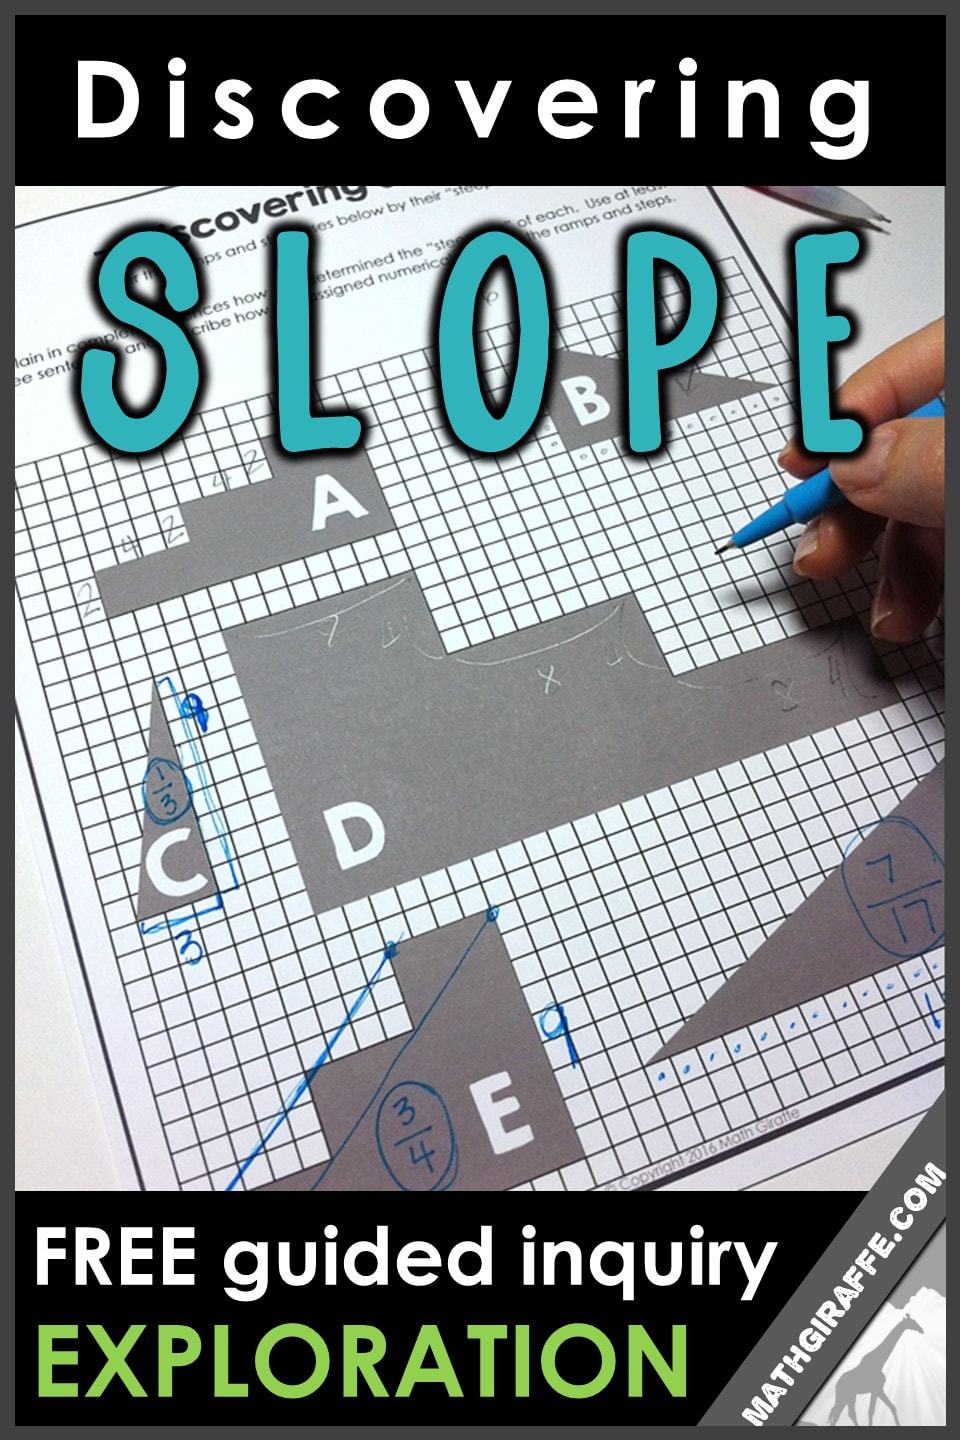 teaching slope through inquiry - a free discovery / guided exploration of slope formula for algebra